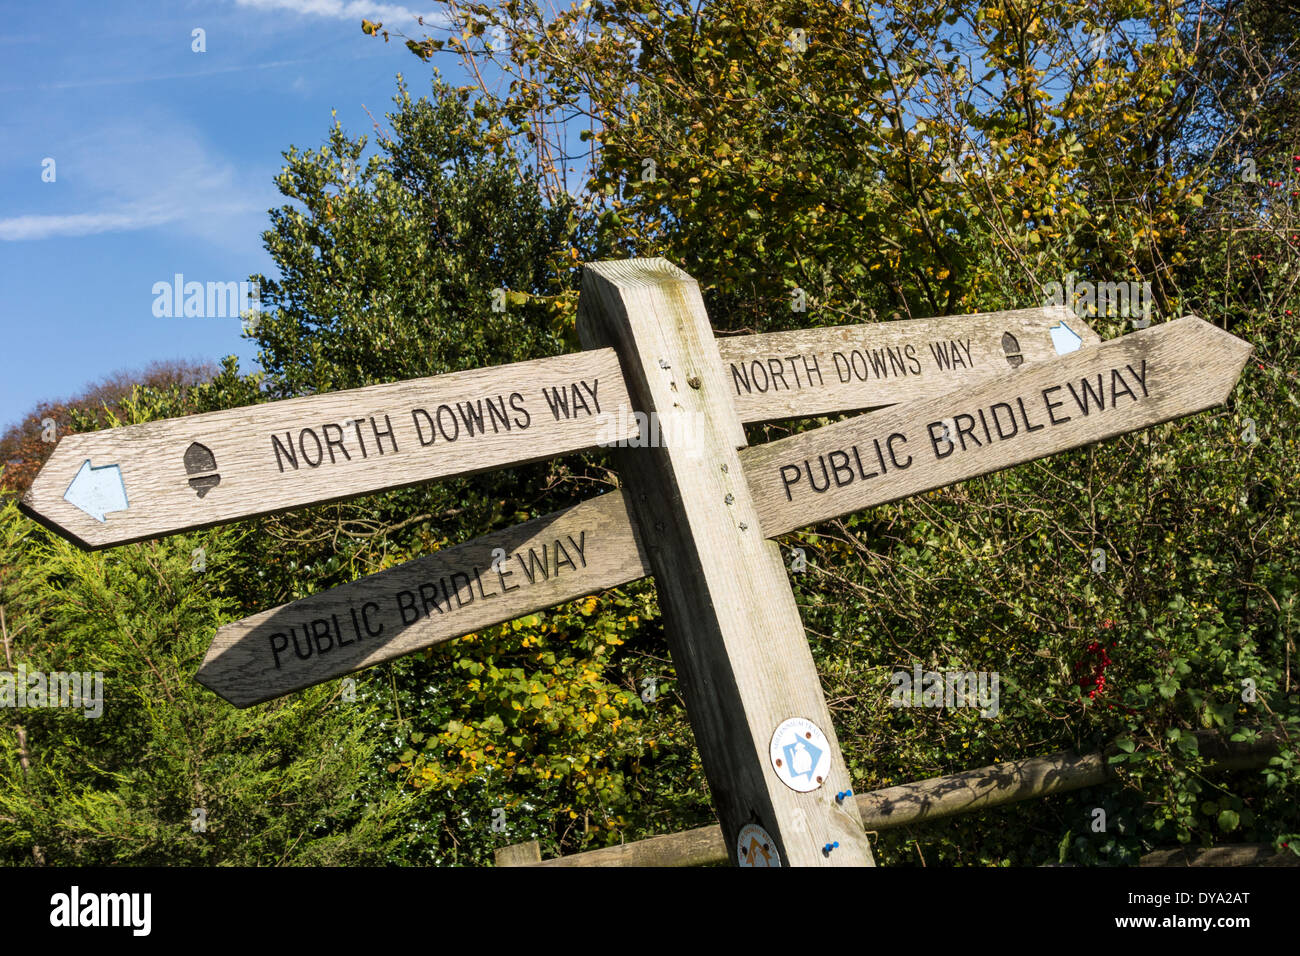 Signpost for North Downs Way at Colley Hill, Reigate, Surrey, UK Stock Photo